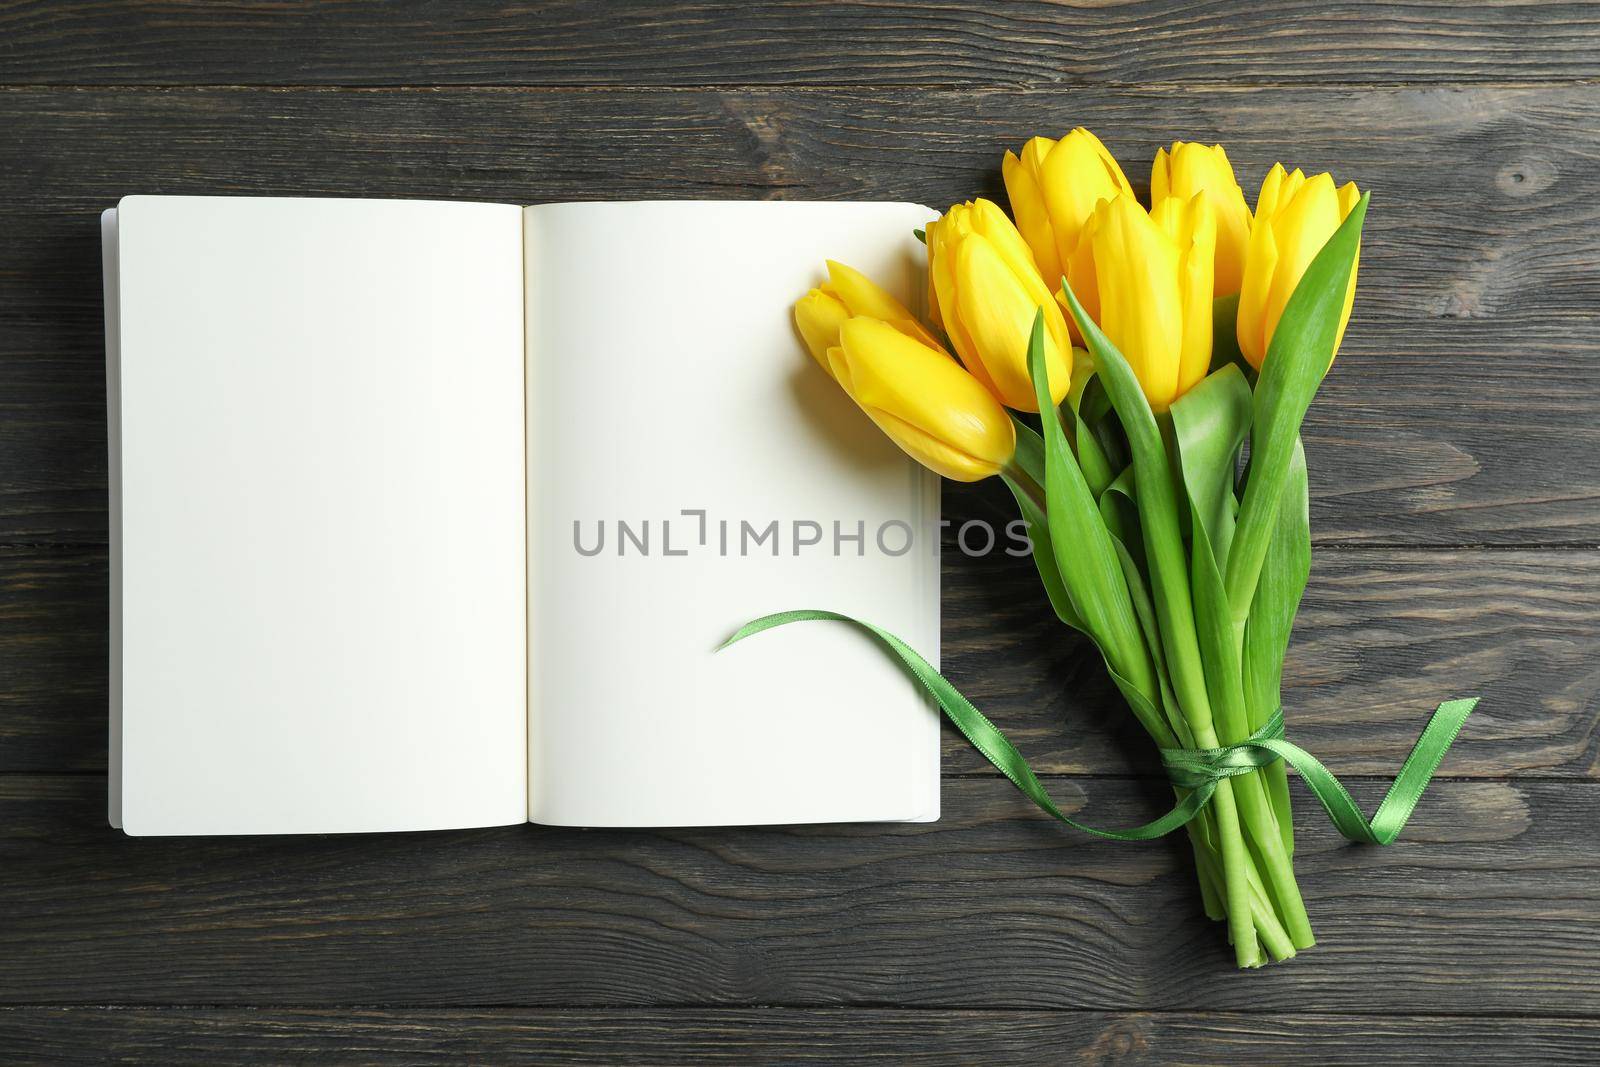 Beautiful yellow tulips and accessories on wooden background, space for text. Blogging concept